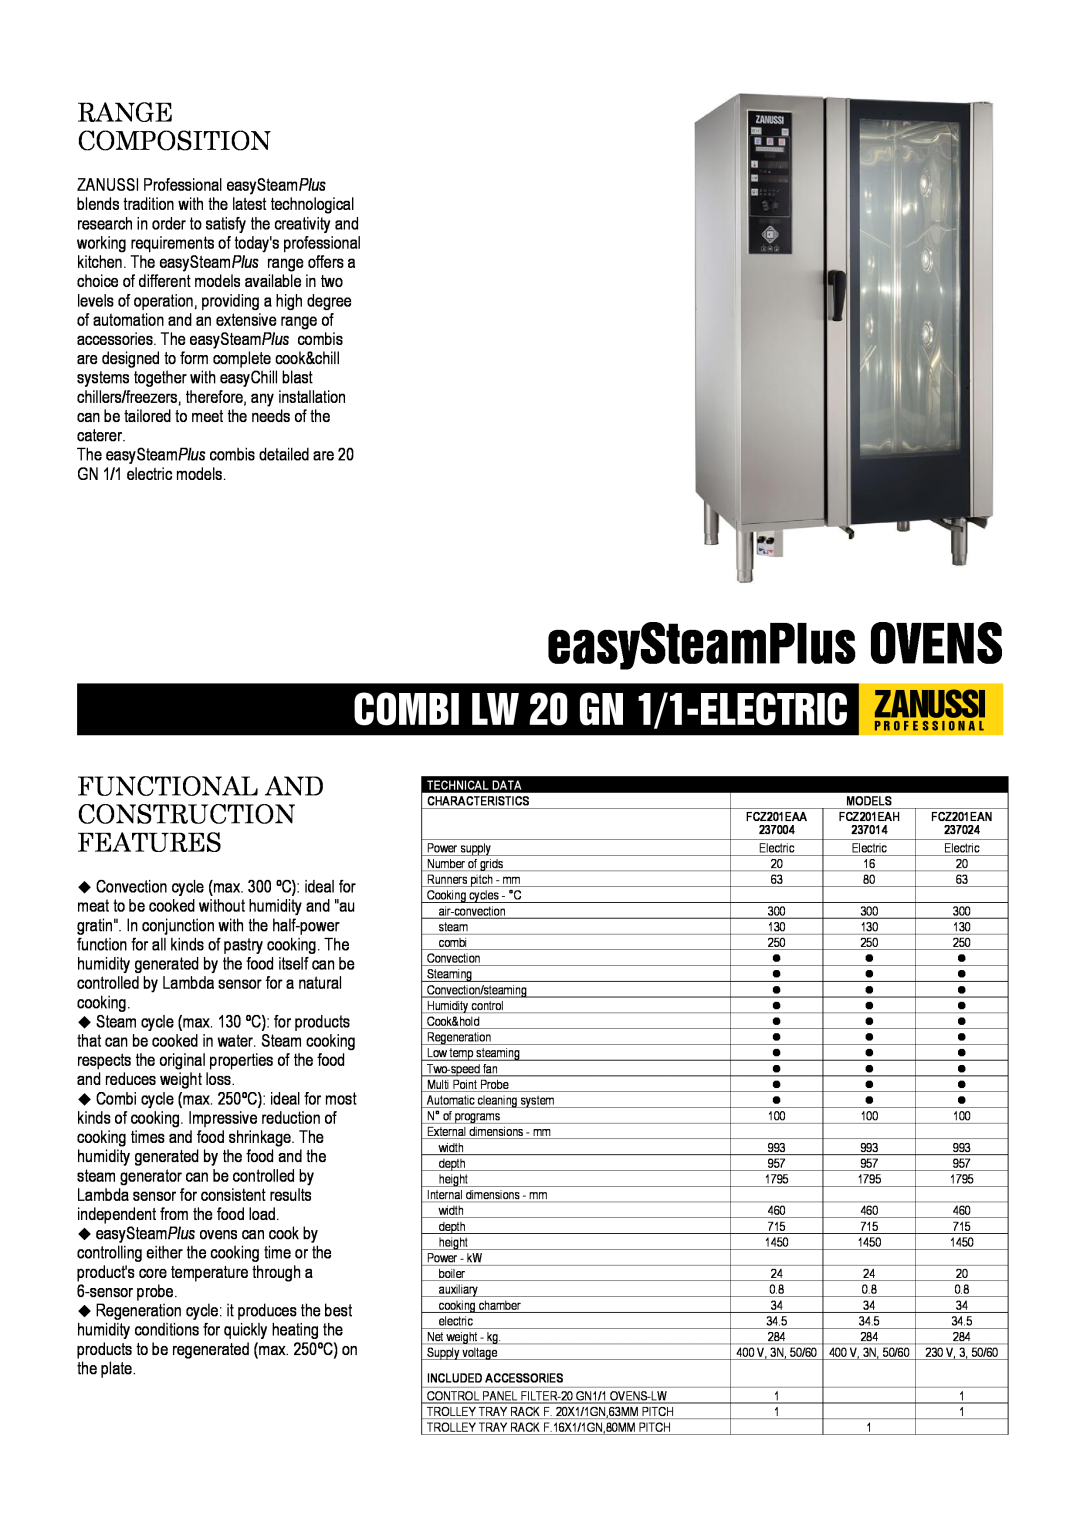 Zanussi FCZ201EAN, FCZ201EAA dimensions easySteamPlus OVENS, Range Composition, Functional And Construction Features 